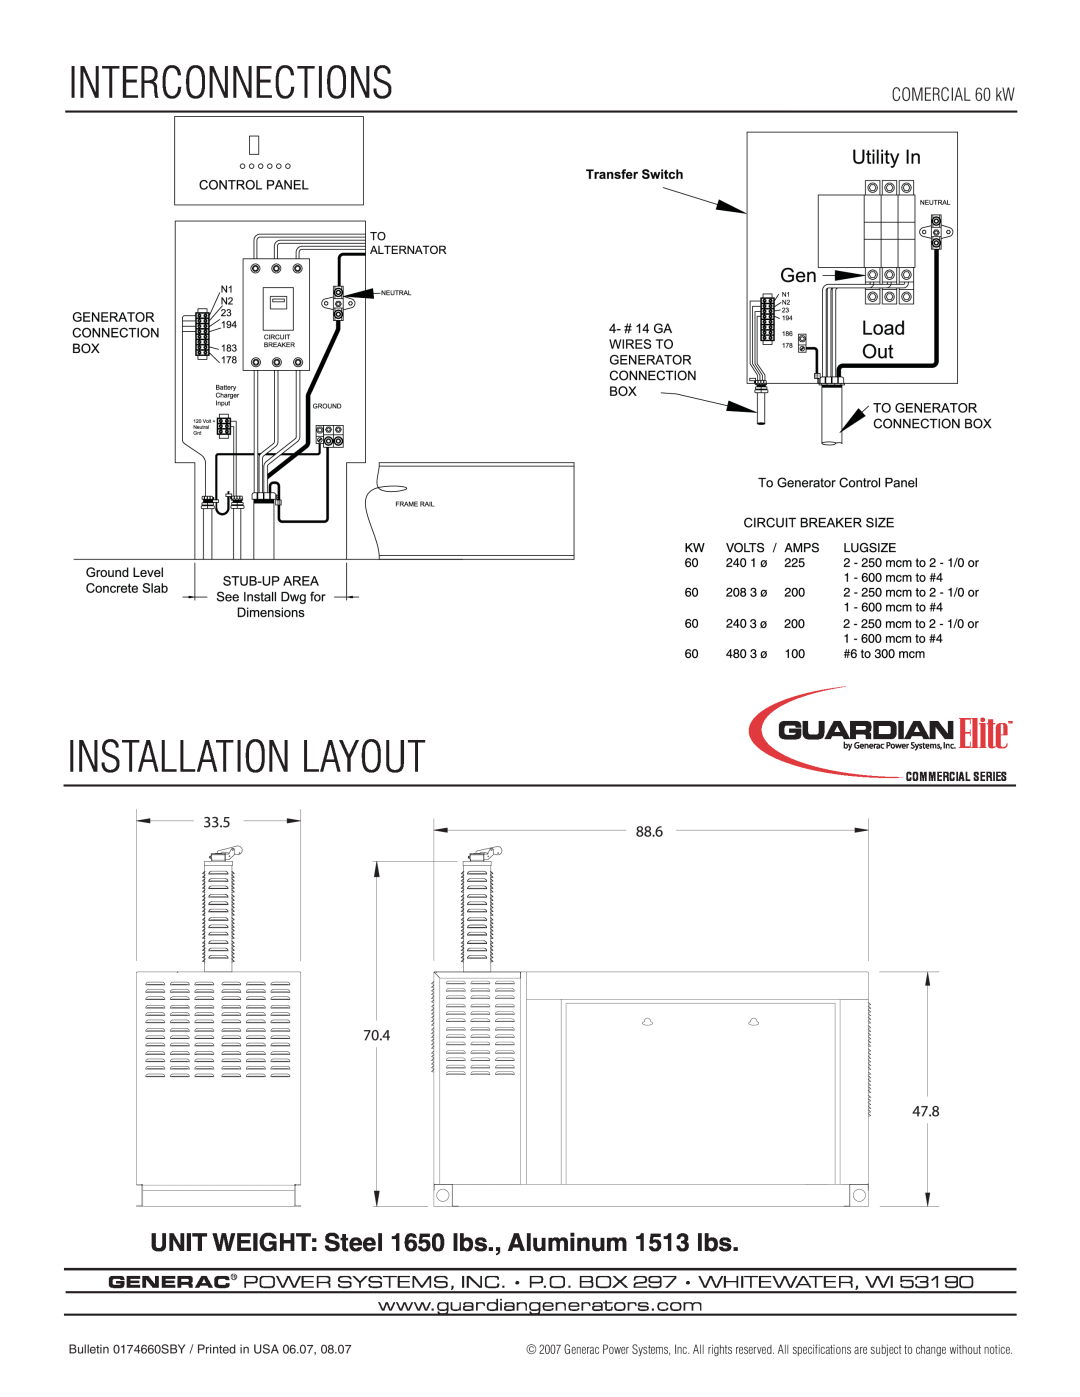 Generac Power Systems COMMERCIAL SERIES manual Interconnections, Installation Layout, COMERCIAL 60 kW, Commercial Series 